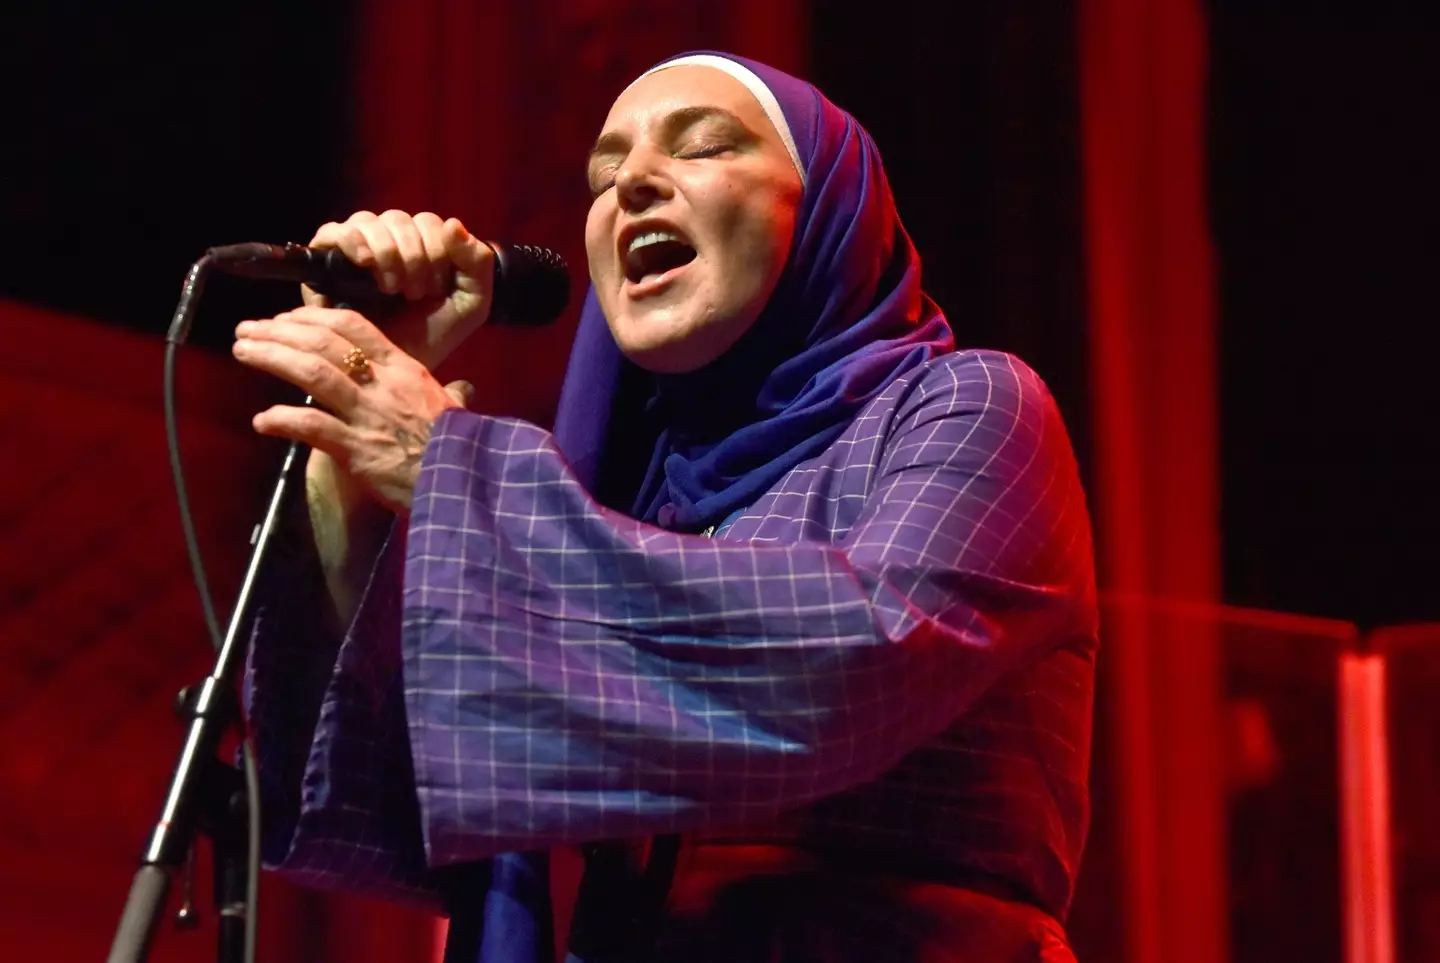 Sinéad O’Connor has died aged 56.